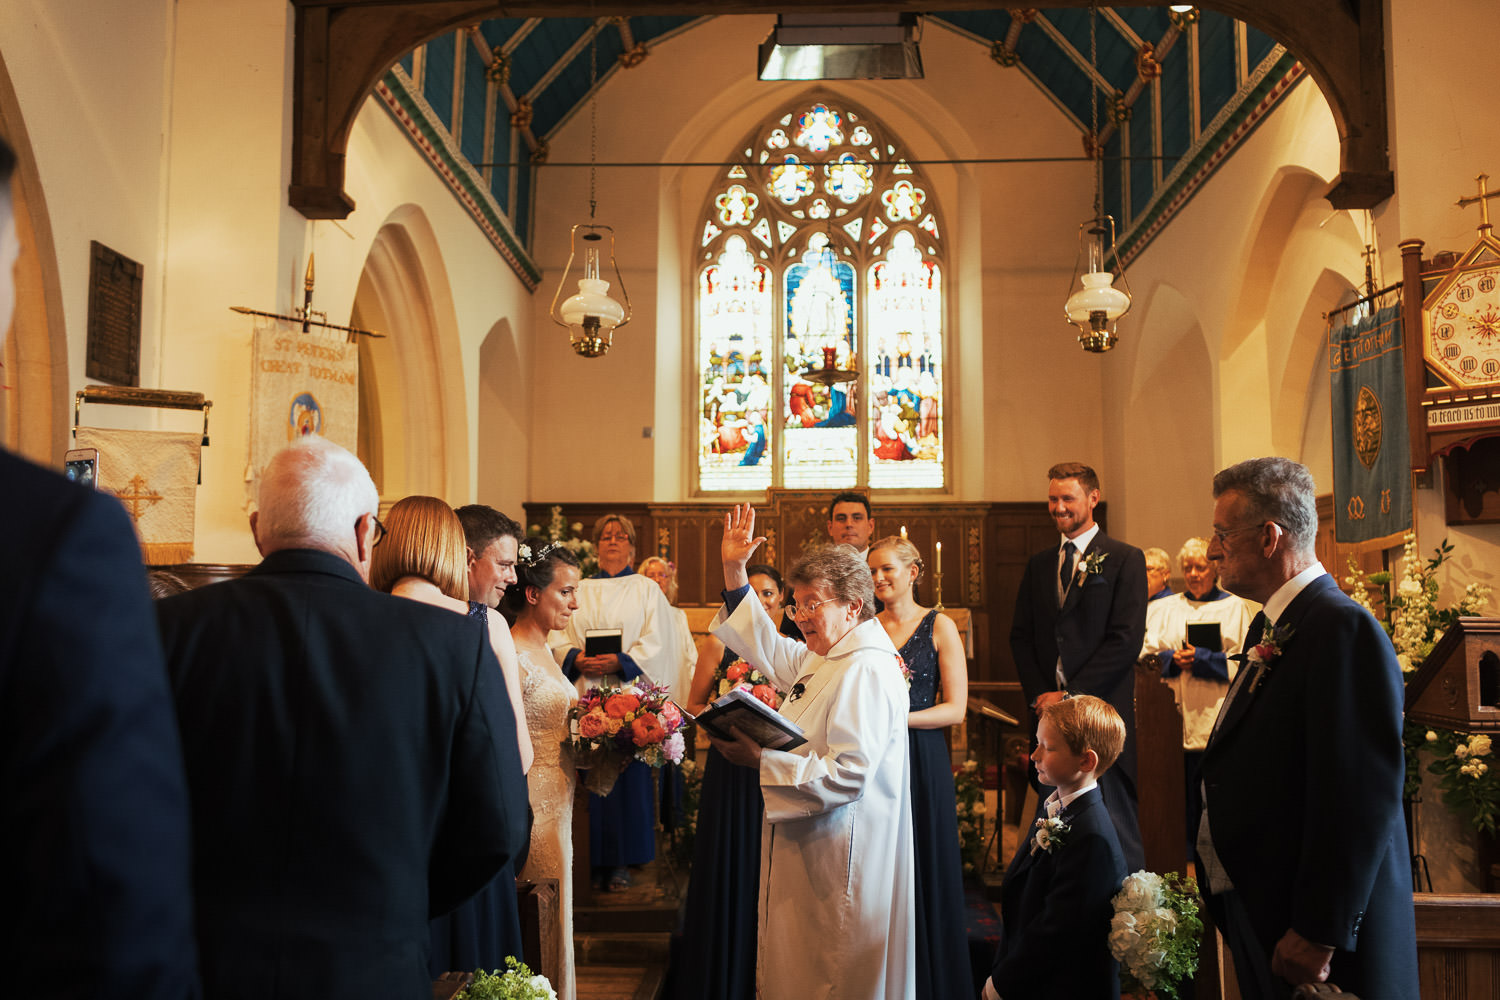 Pictures inside St Peter's Church, Great Totham for wedding ceremony